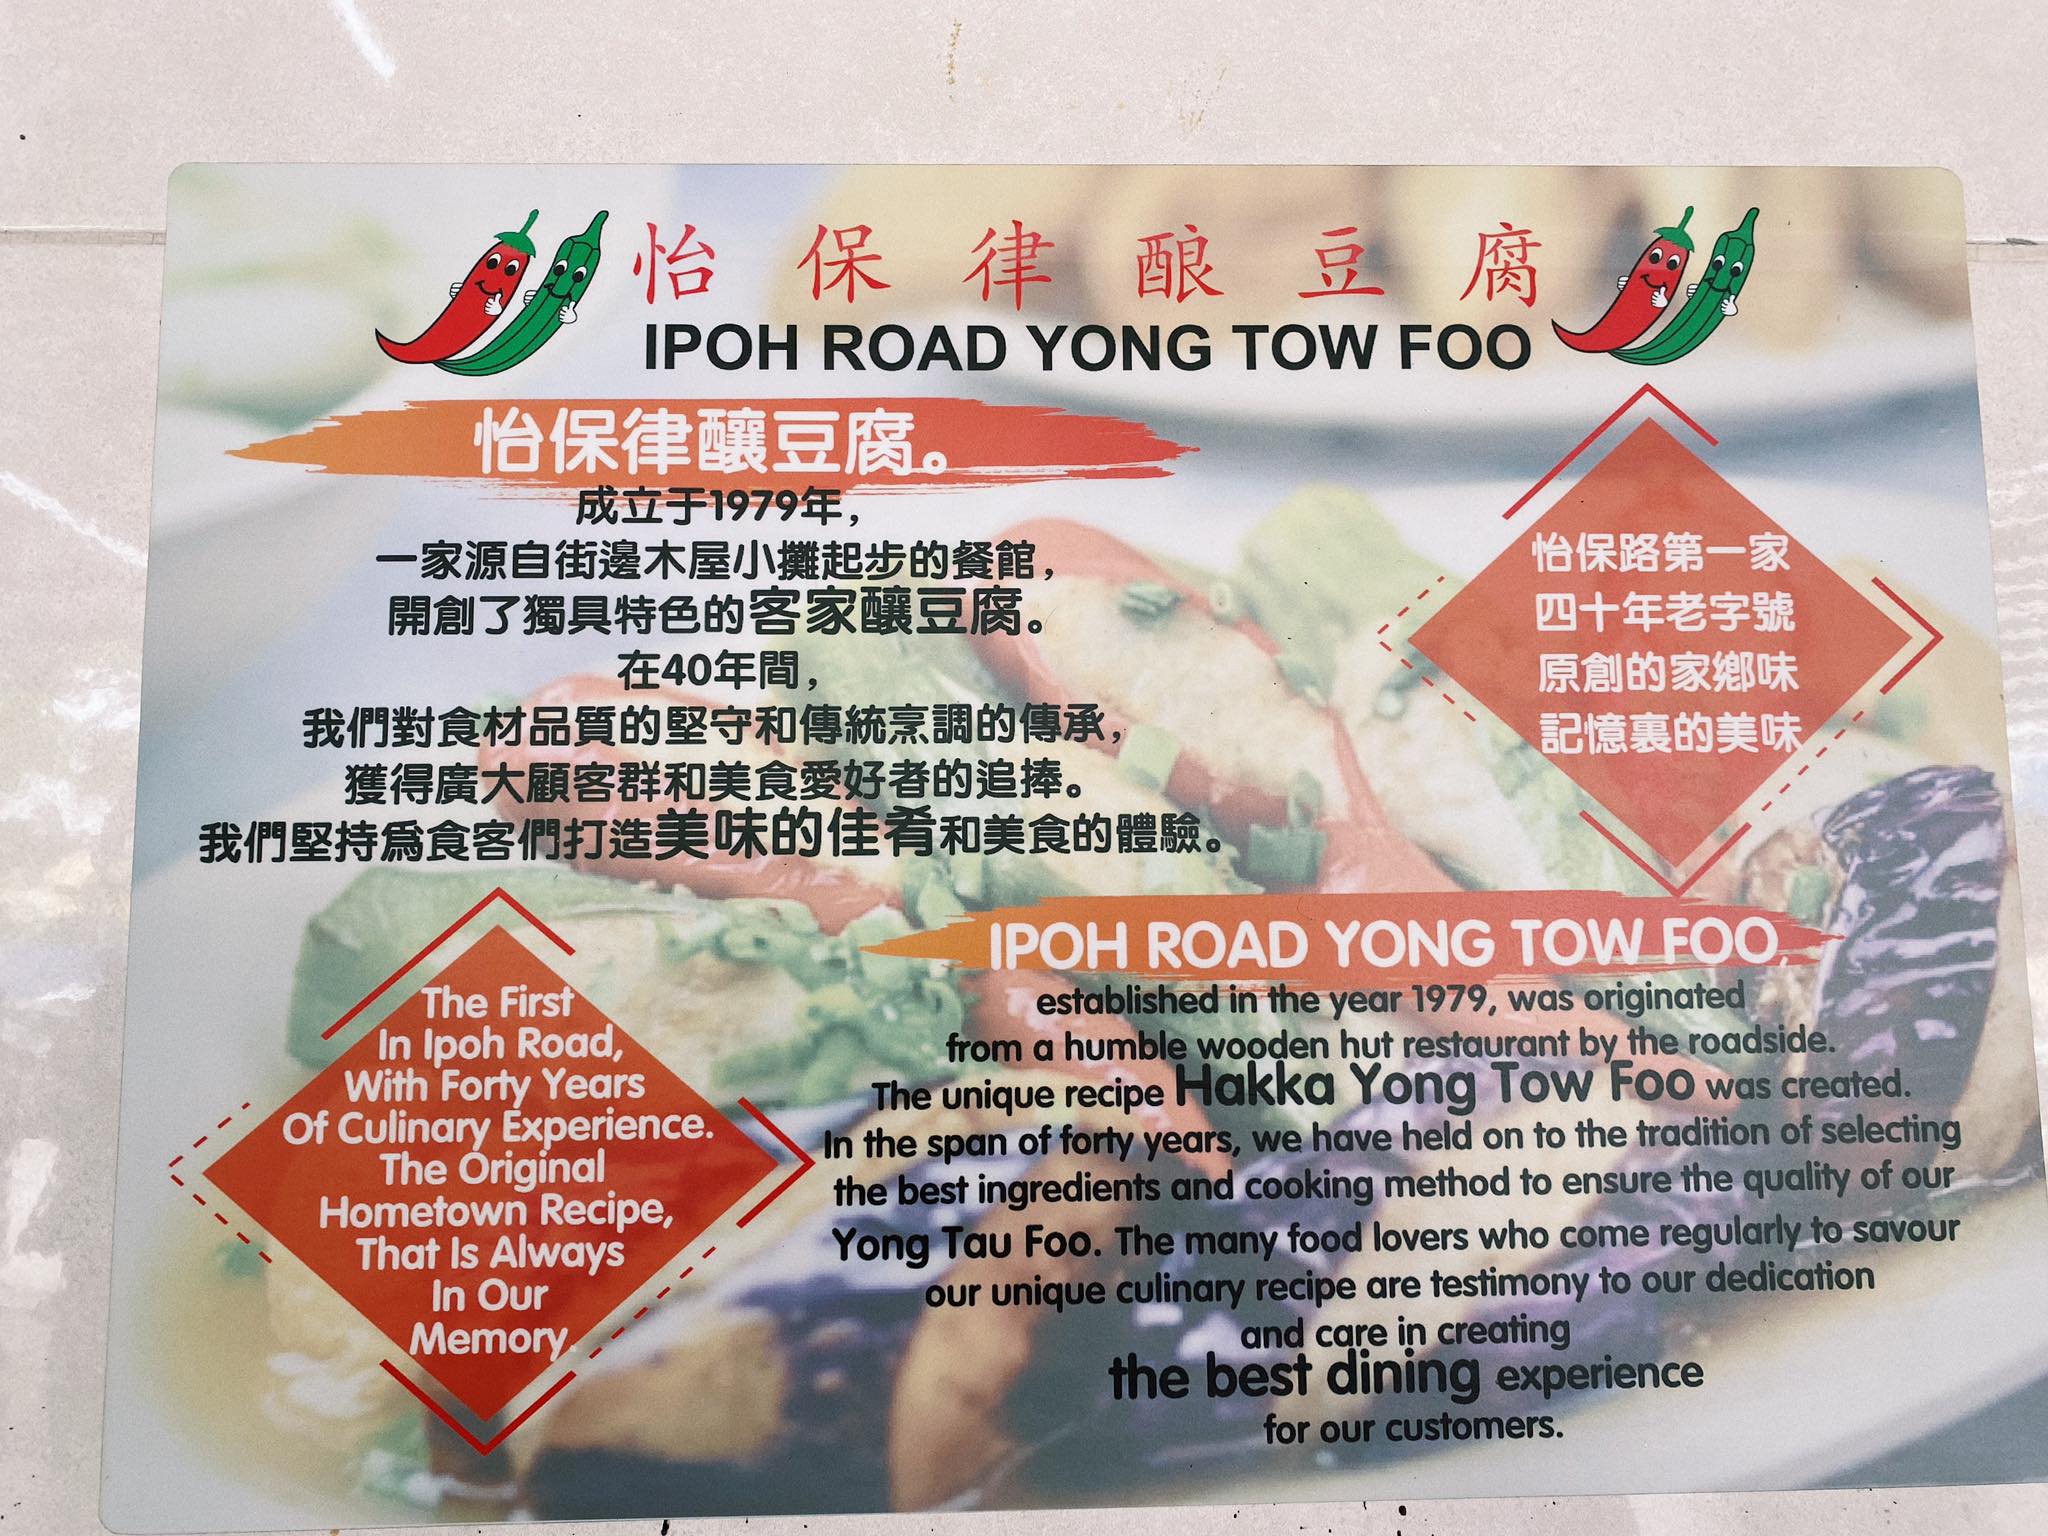 Ipoh road yong tow foo signage